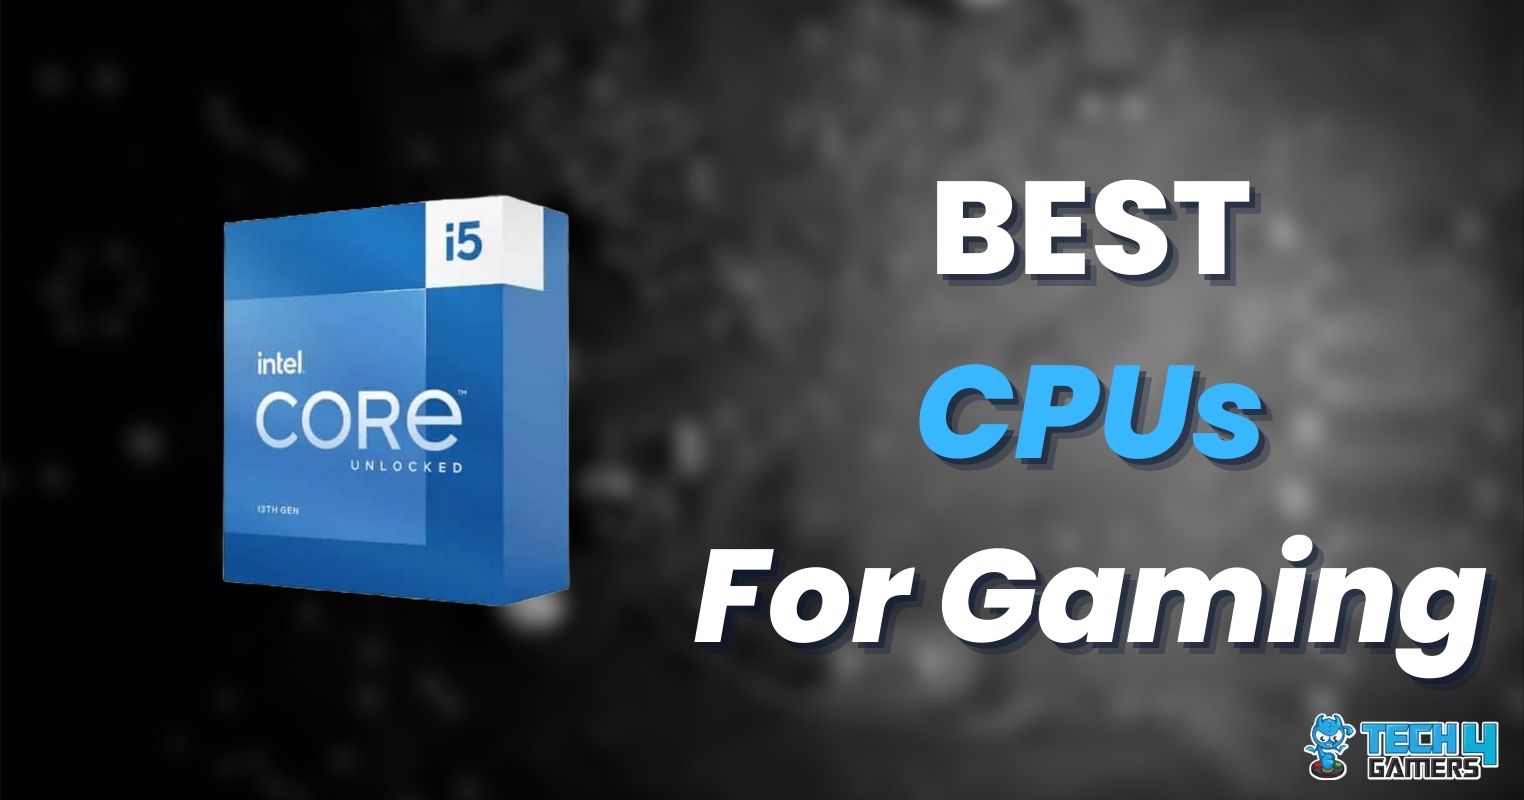 BEST CPUs For Gaming